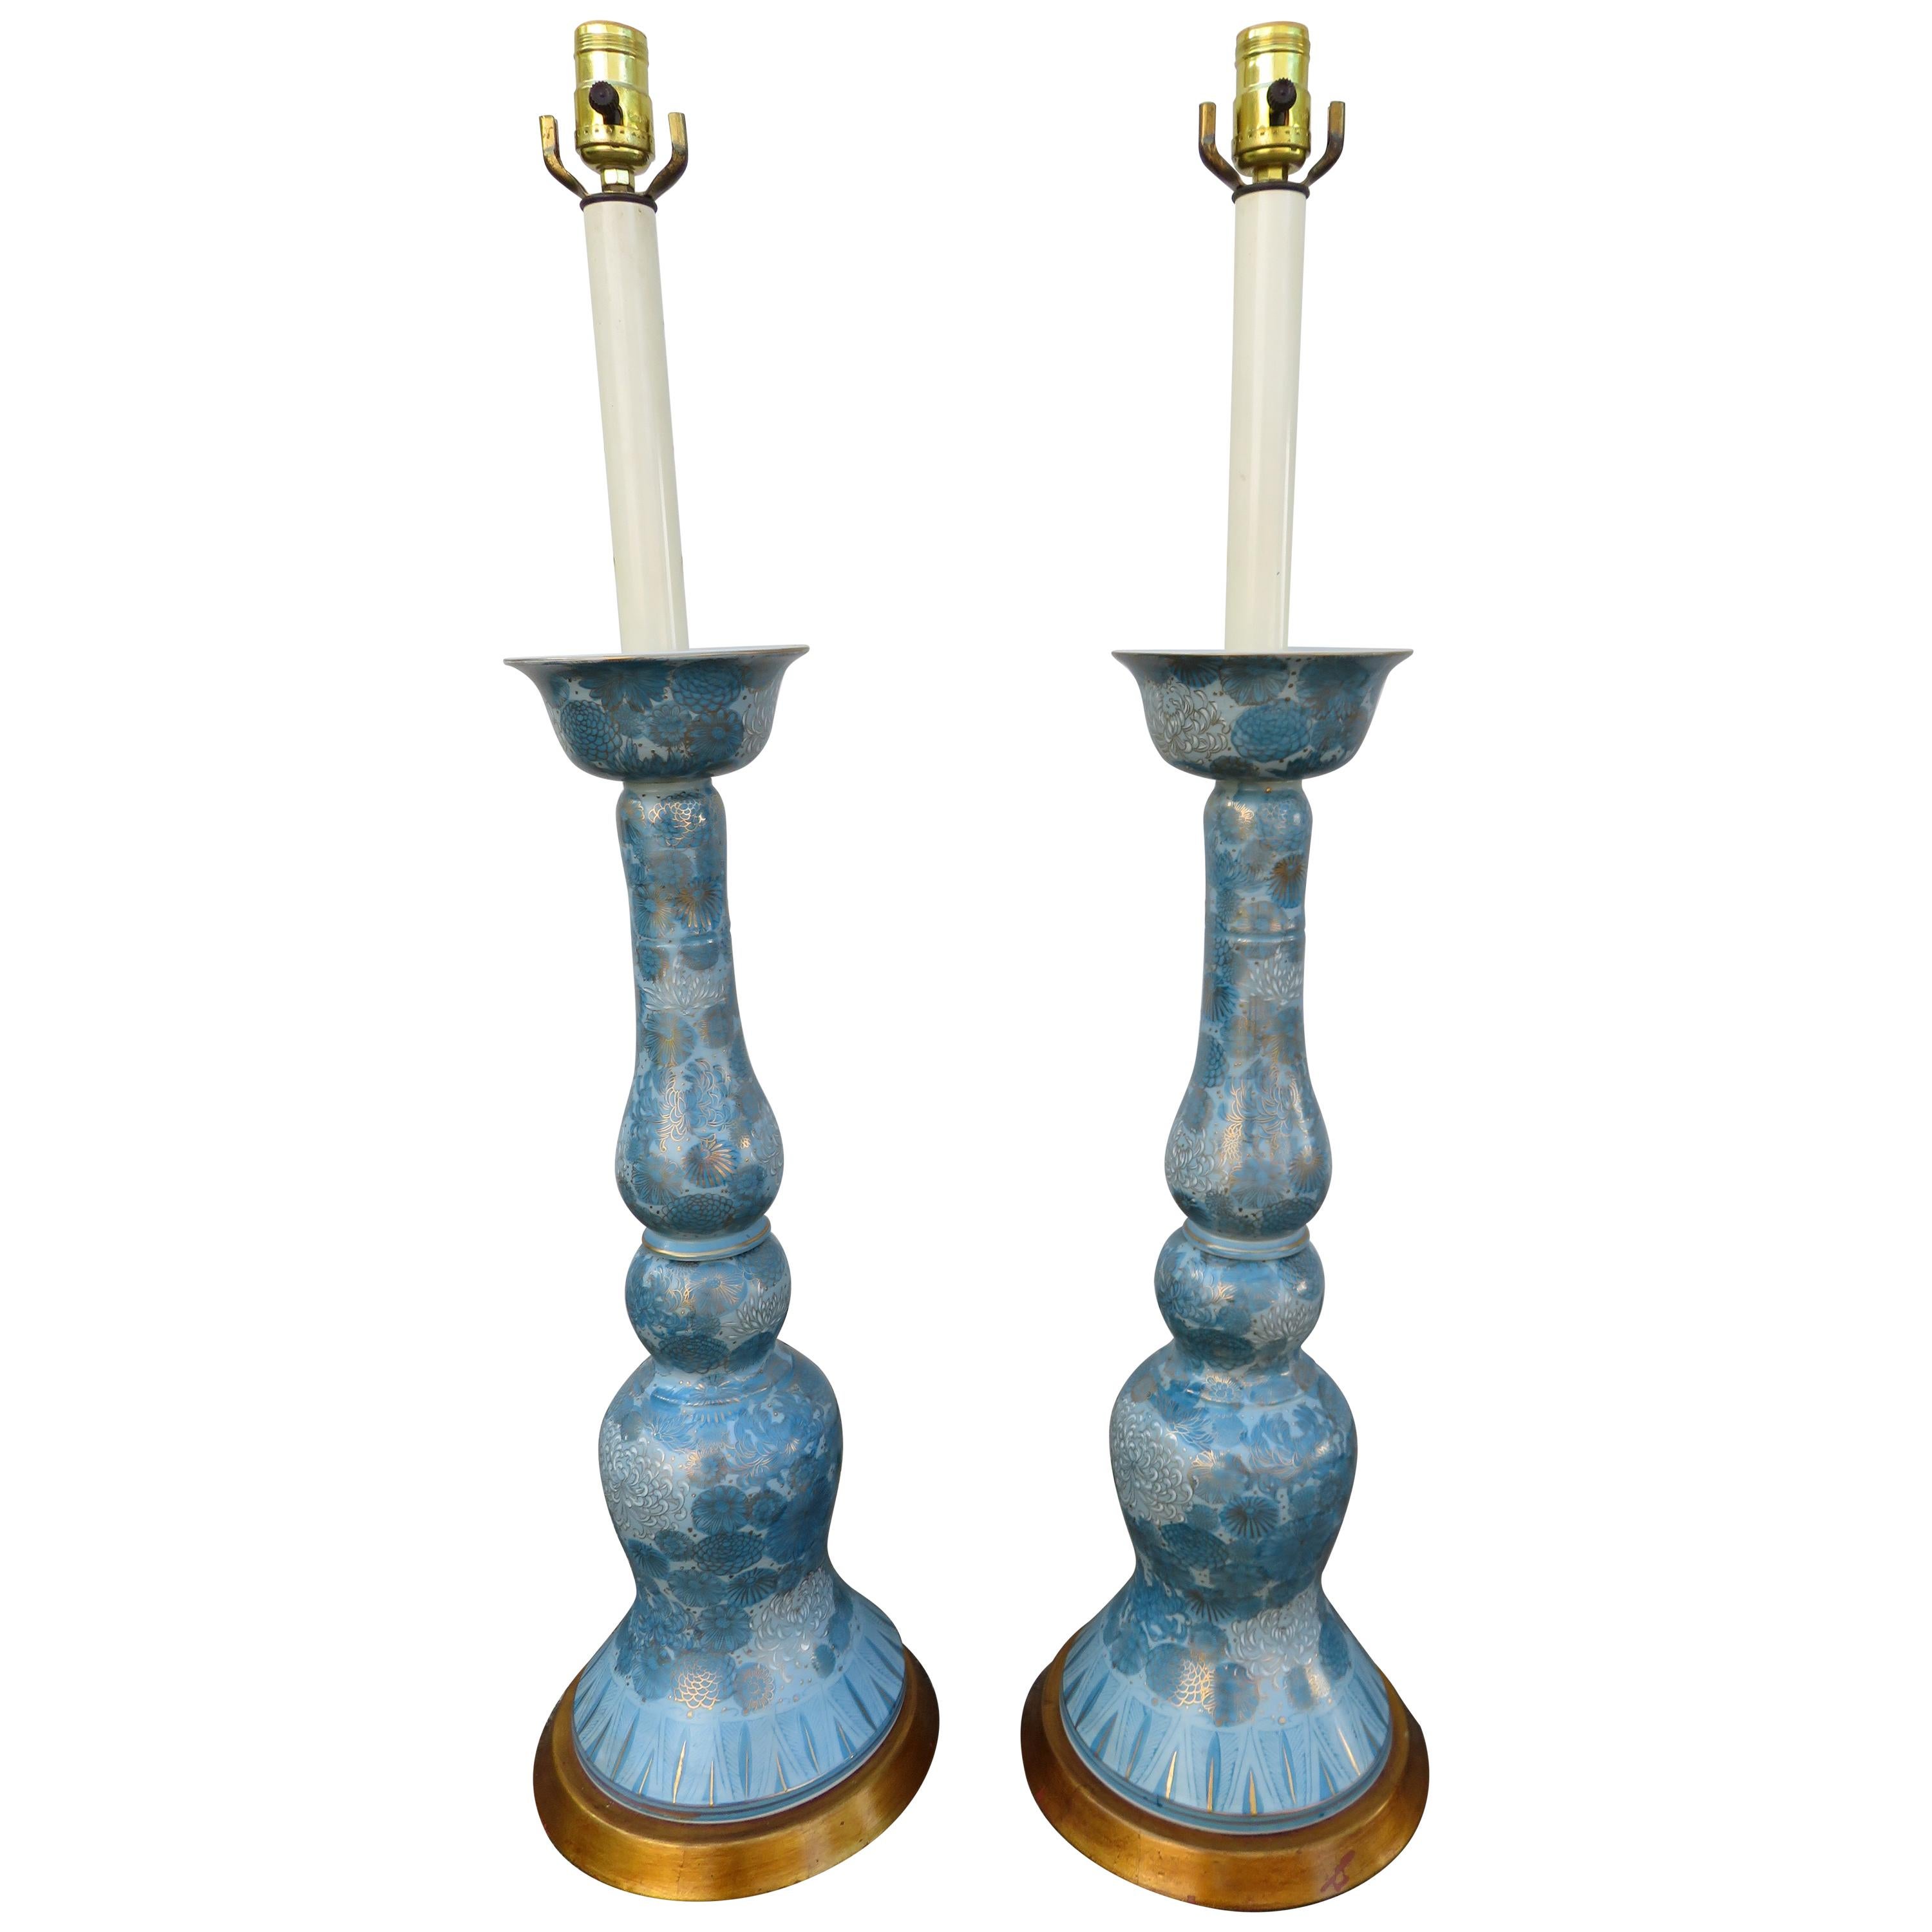 Spectacular Large Pair Marbro Blue and White Chrysanthemum Porcelain Lamps